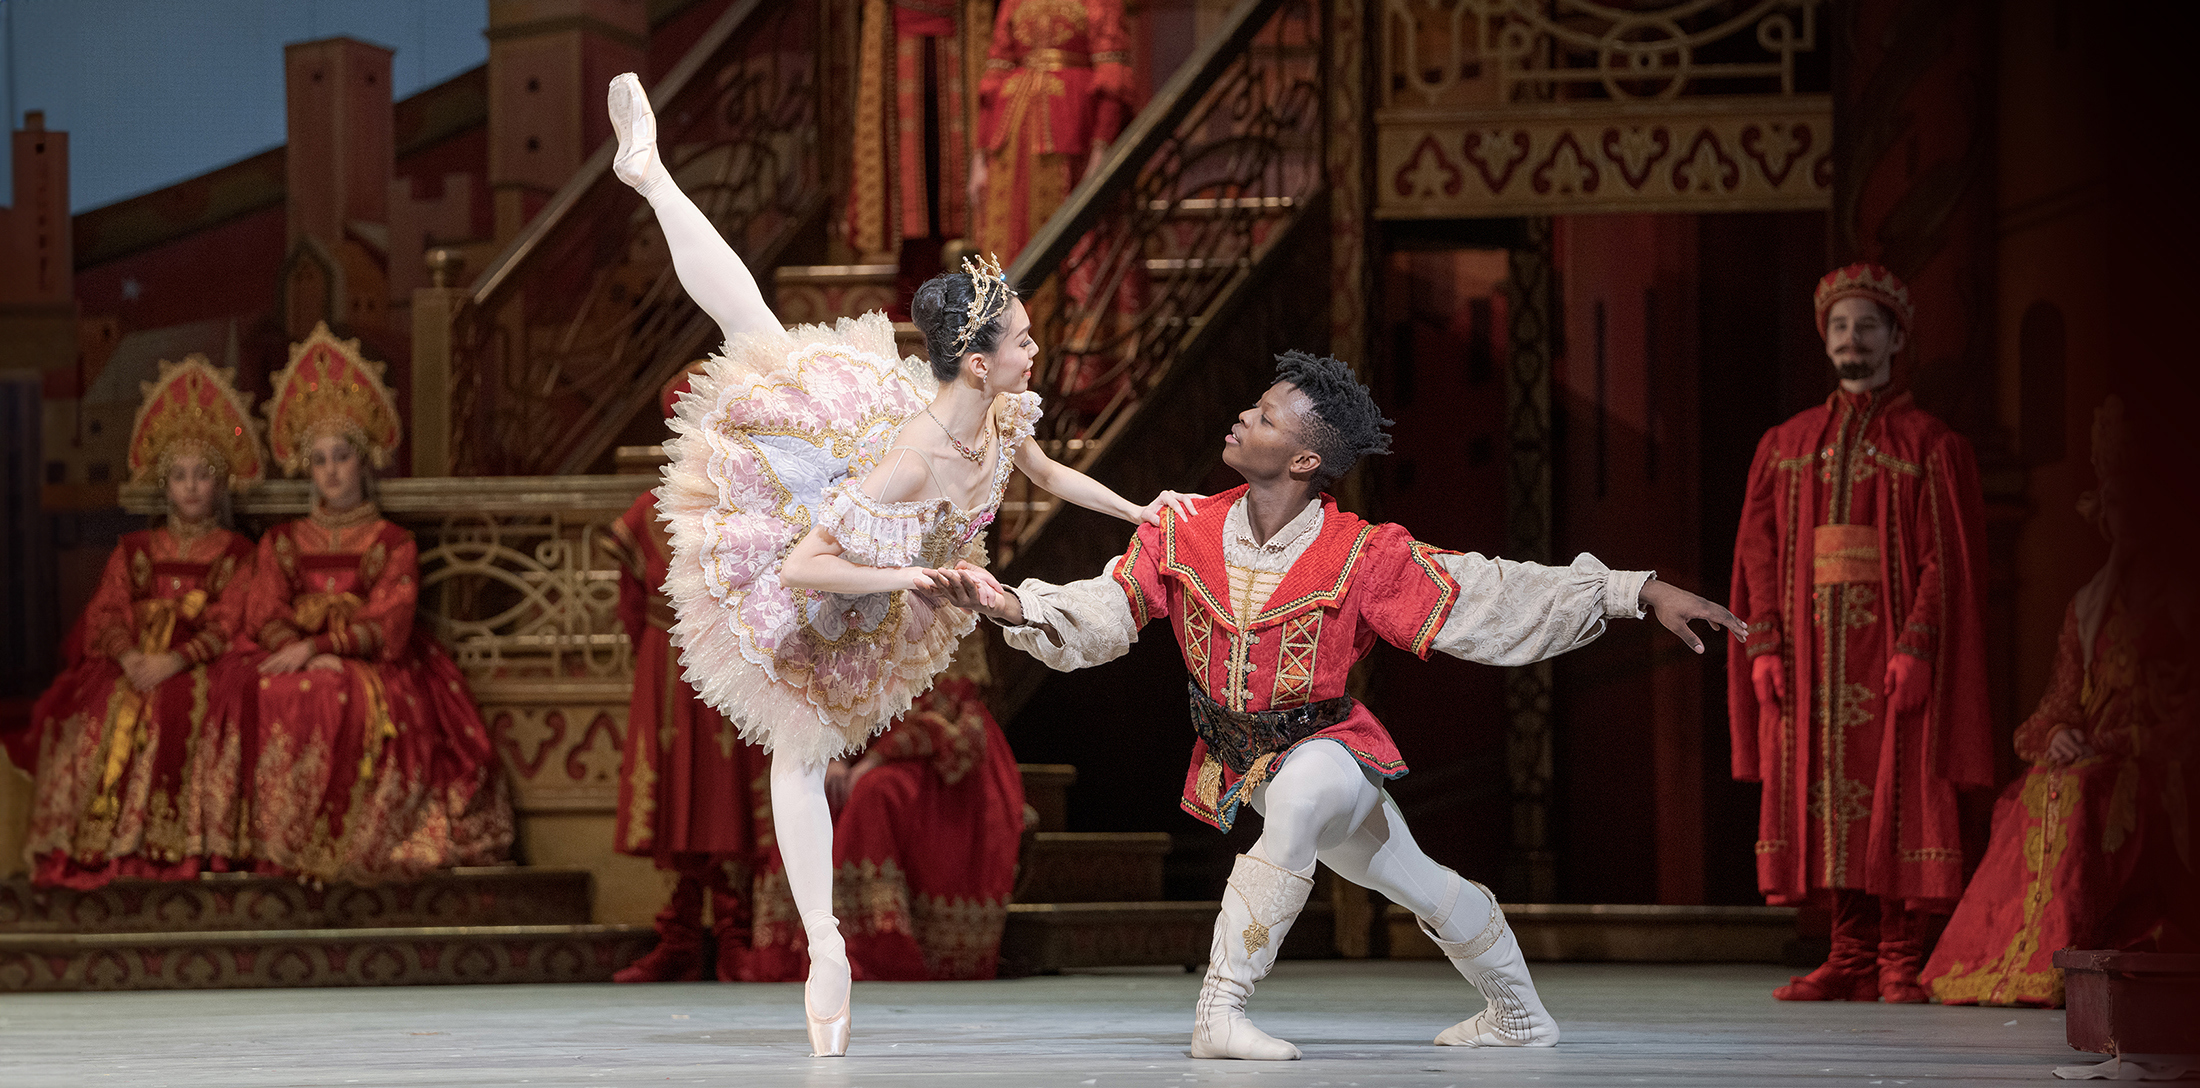 Tirion Law and Siphesihle November in The Nutcracker.